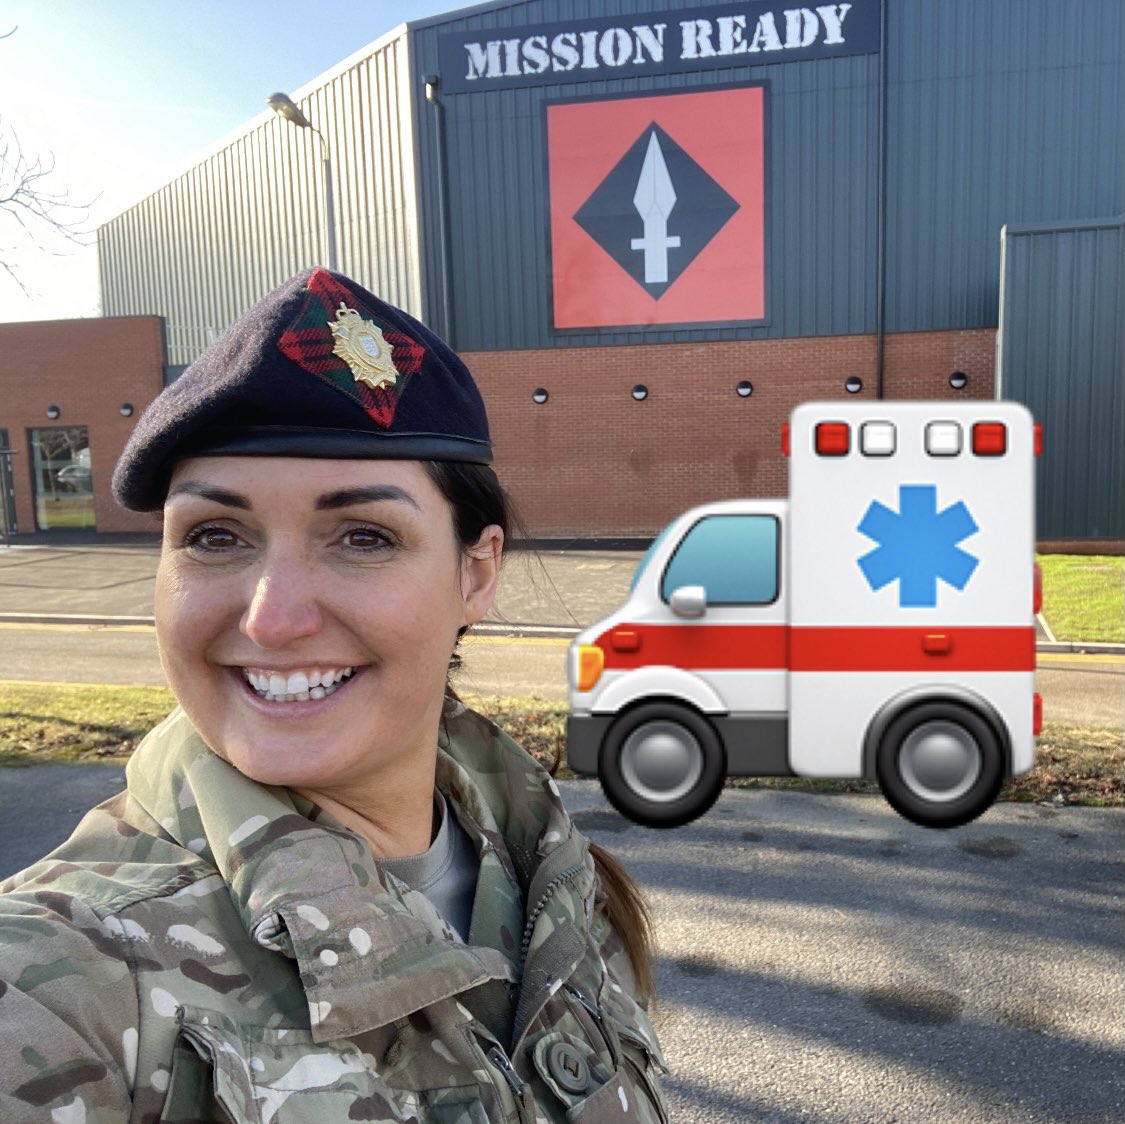 Military Aid to the Civil Authorities is just one of the experiences of a Reservist!  Looking forward to being part of the team of soldiers supporting the Scottish Ambulance Service 🏴󠁧󠁢󠁳󠁣󠁴󠁿 

#Reserved4More 
#ArmyConfidence @154ScottishRegt @Lowland_RFCA @ArmyinScotland 
@armyjobs